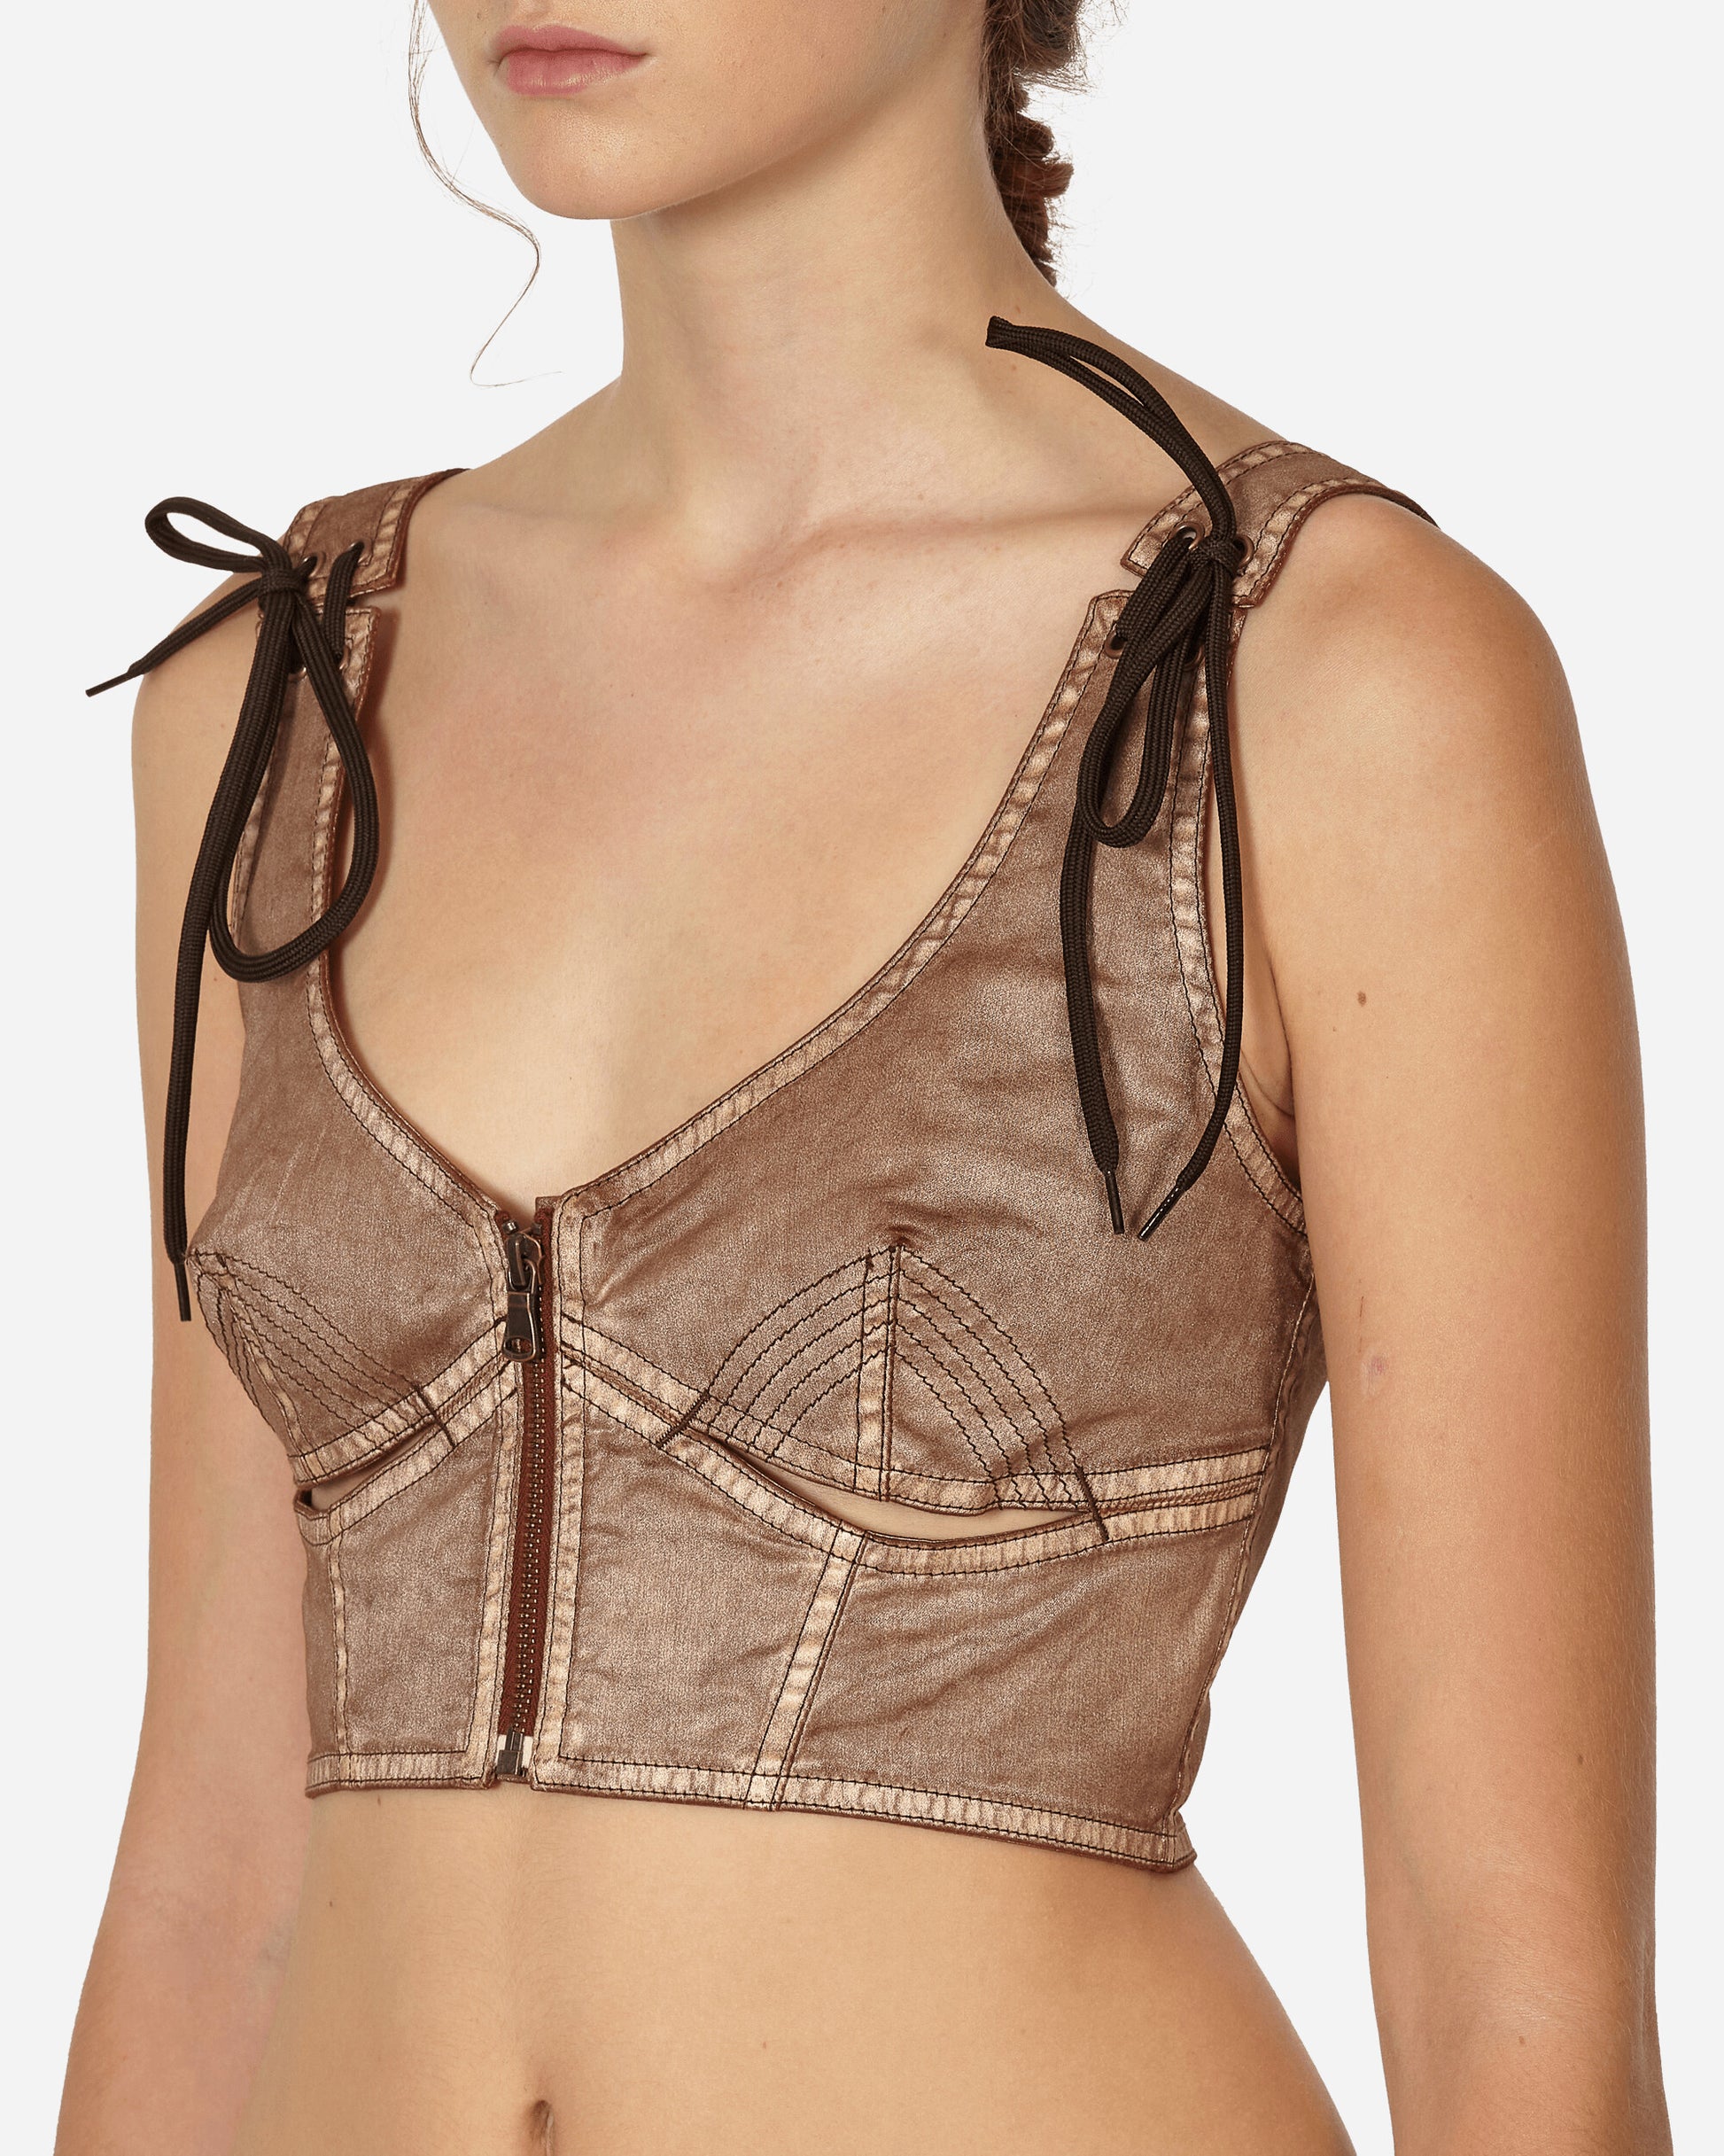 Jean Paul Gaultier Wmns Knwls Laced Cropped Top Sleeveless Brown/Ecru T-Shirts Top 2314-F-TO101TP-D005 6003